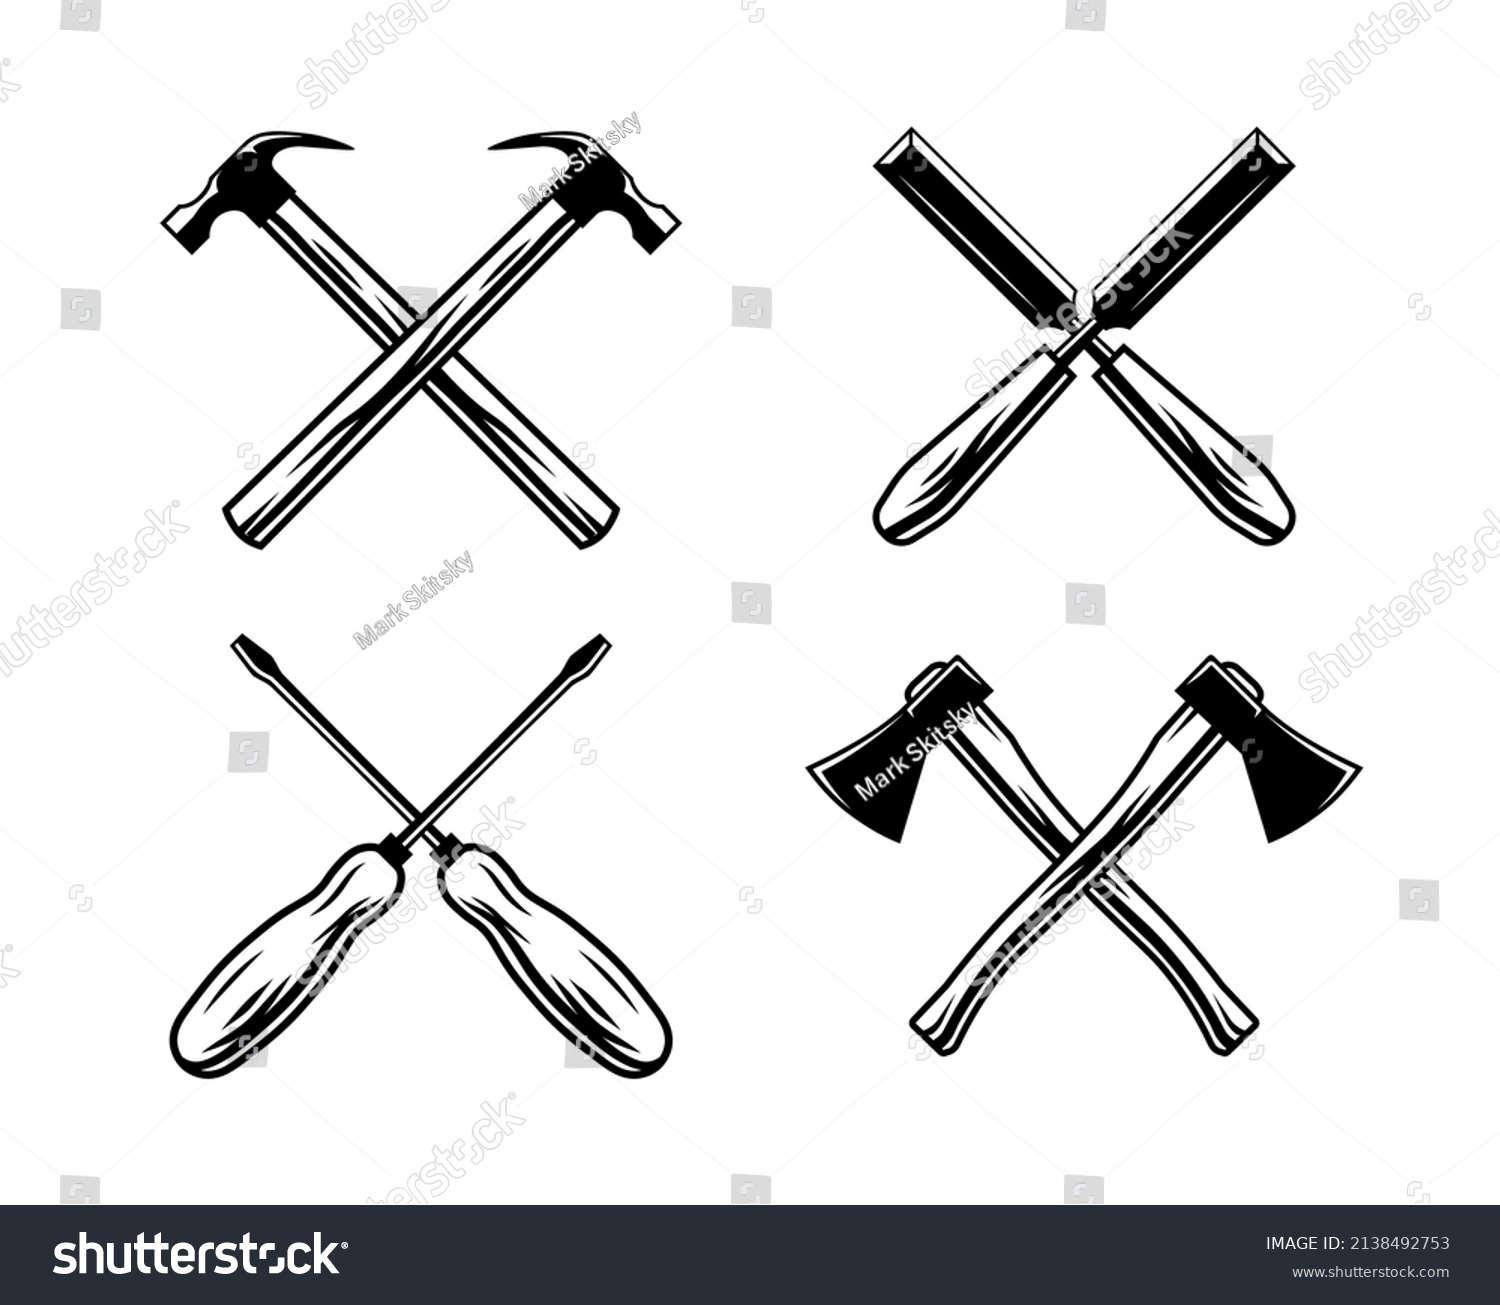 SVG of Vector illustration of a woodworking objects set: hammer, chisel, screwdriver, axe. Carpentry tools in hand drawn vintage engraving style svg